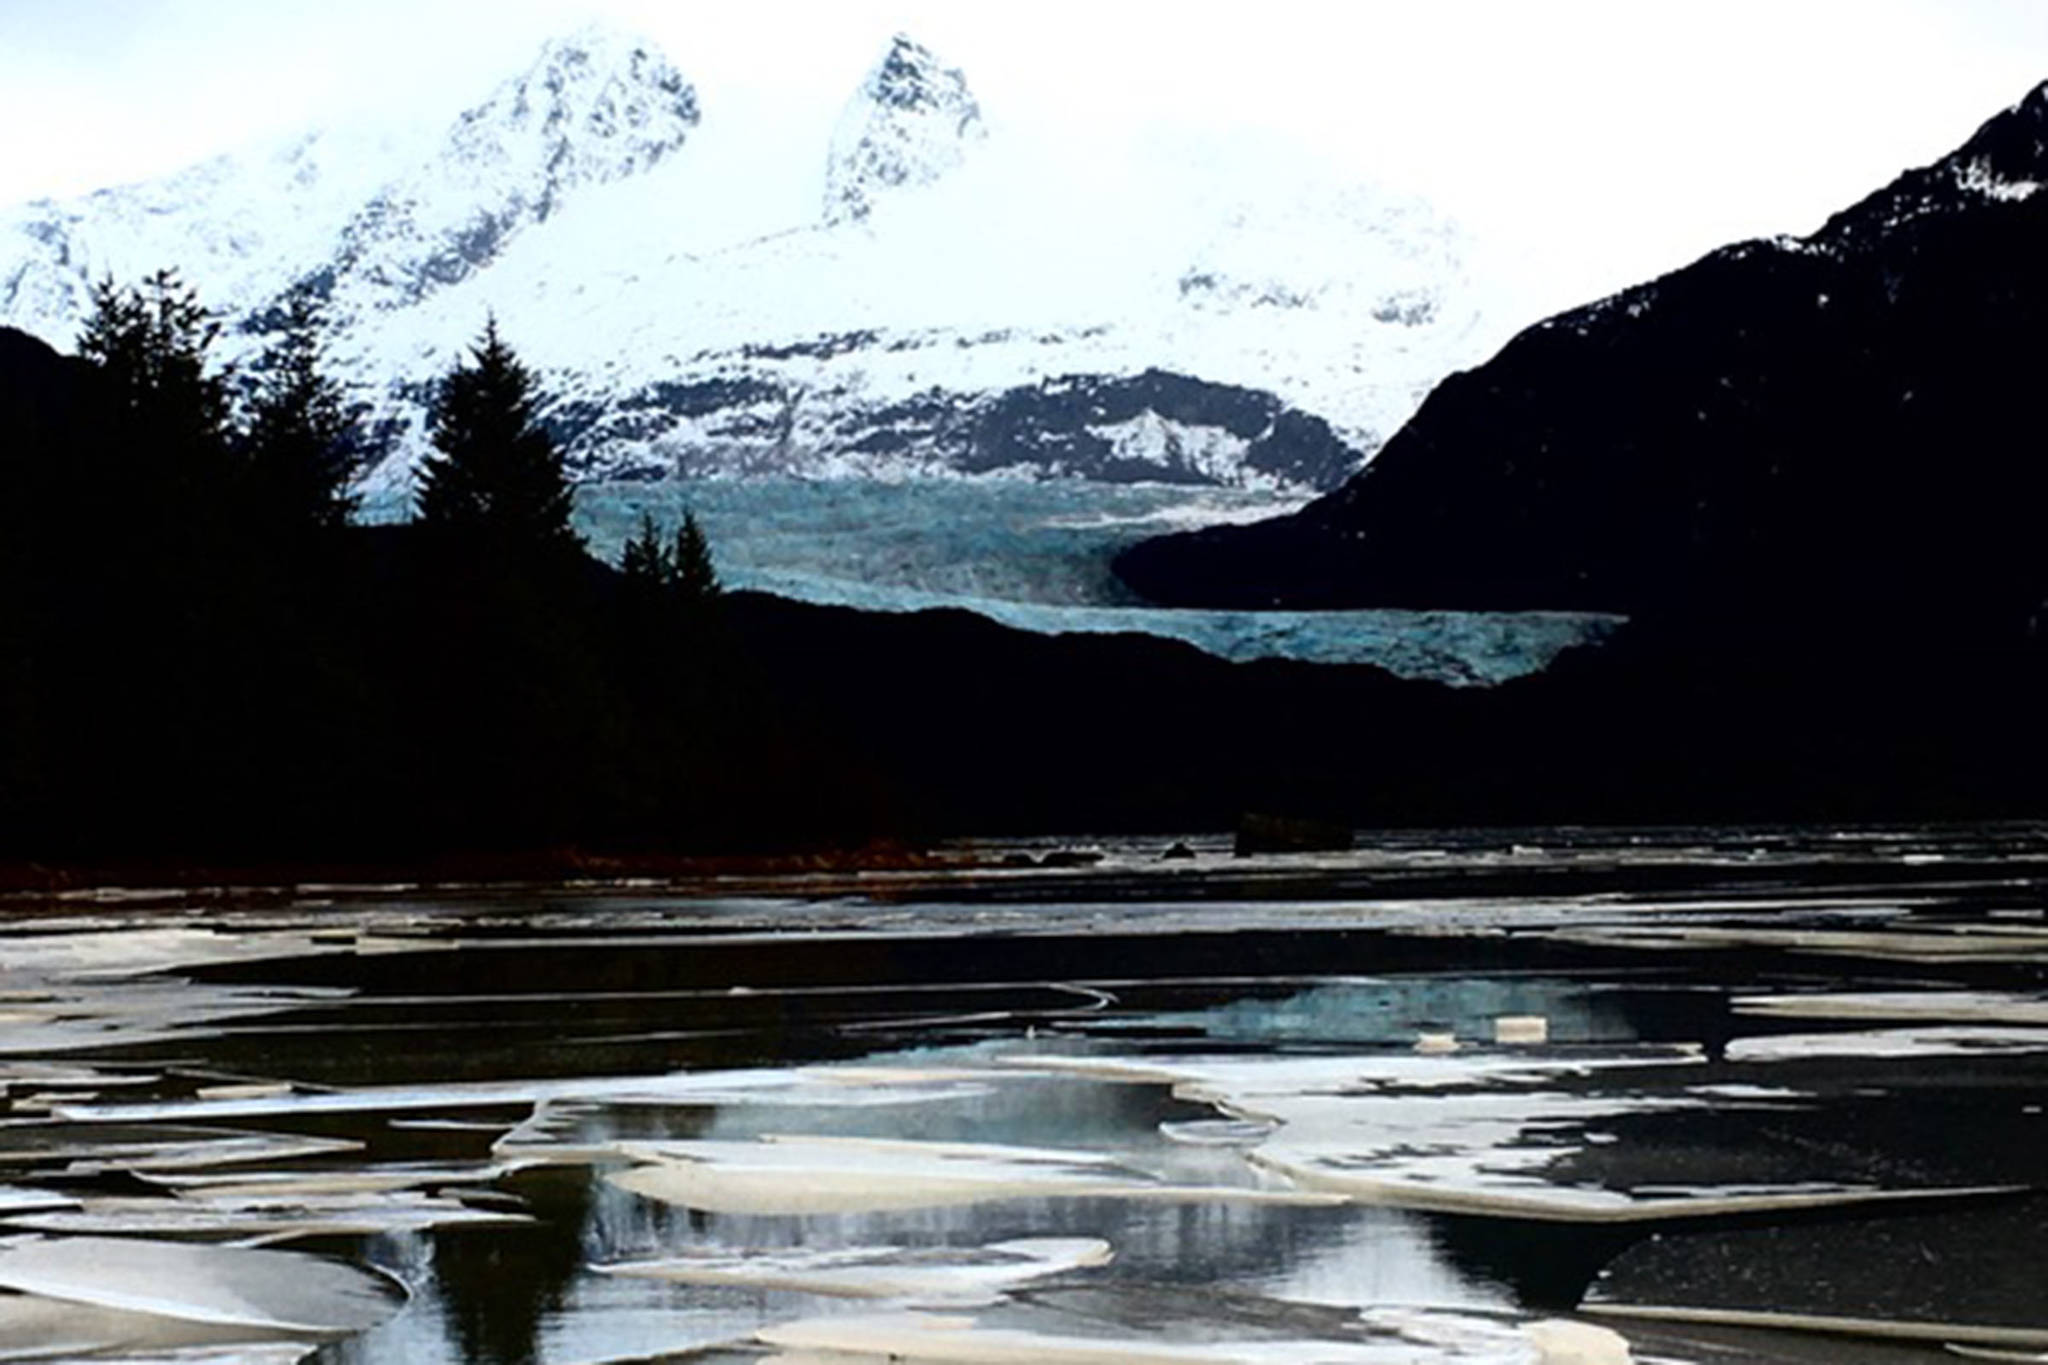 This Dec. 9 photo shows reflections in Mendenhall Lake. (Courtesy Photo / Linda Buckley)